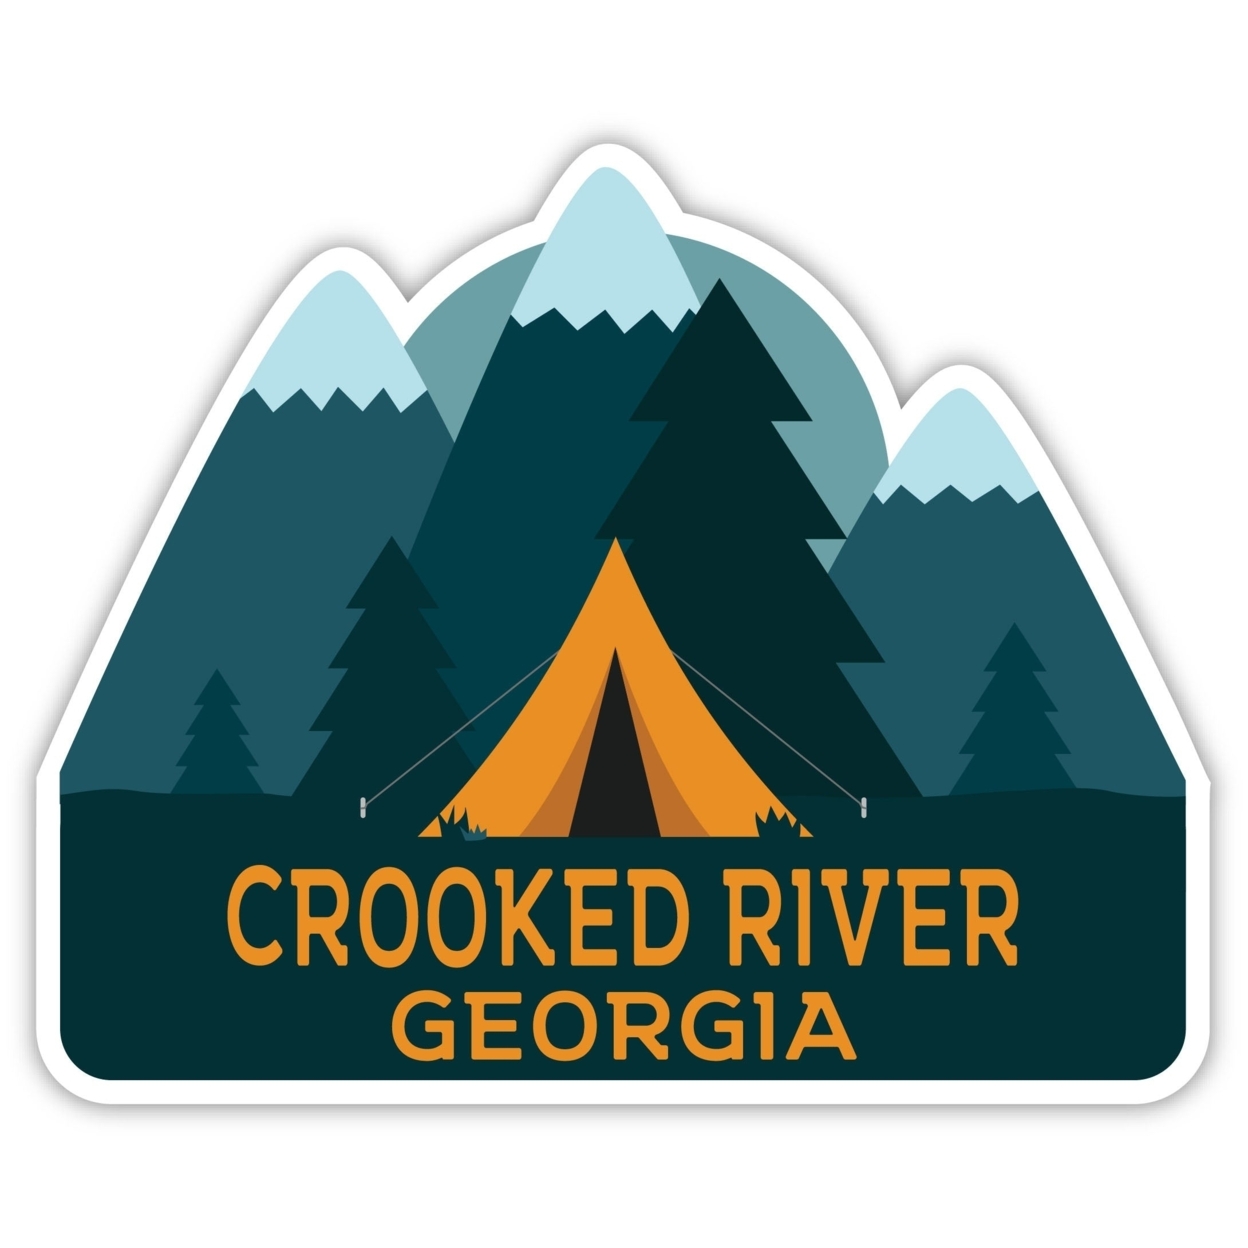 Crooked River Georgia Souvenir Decorative Stickers (Choose Theme And Size) - 4-Pack, 2-Inch, Tent